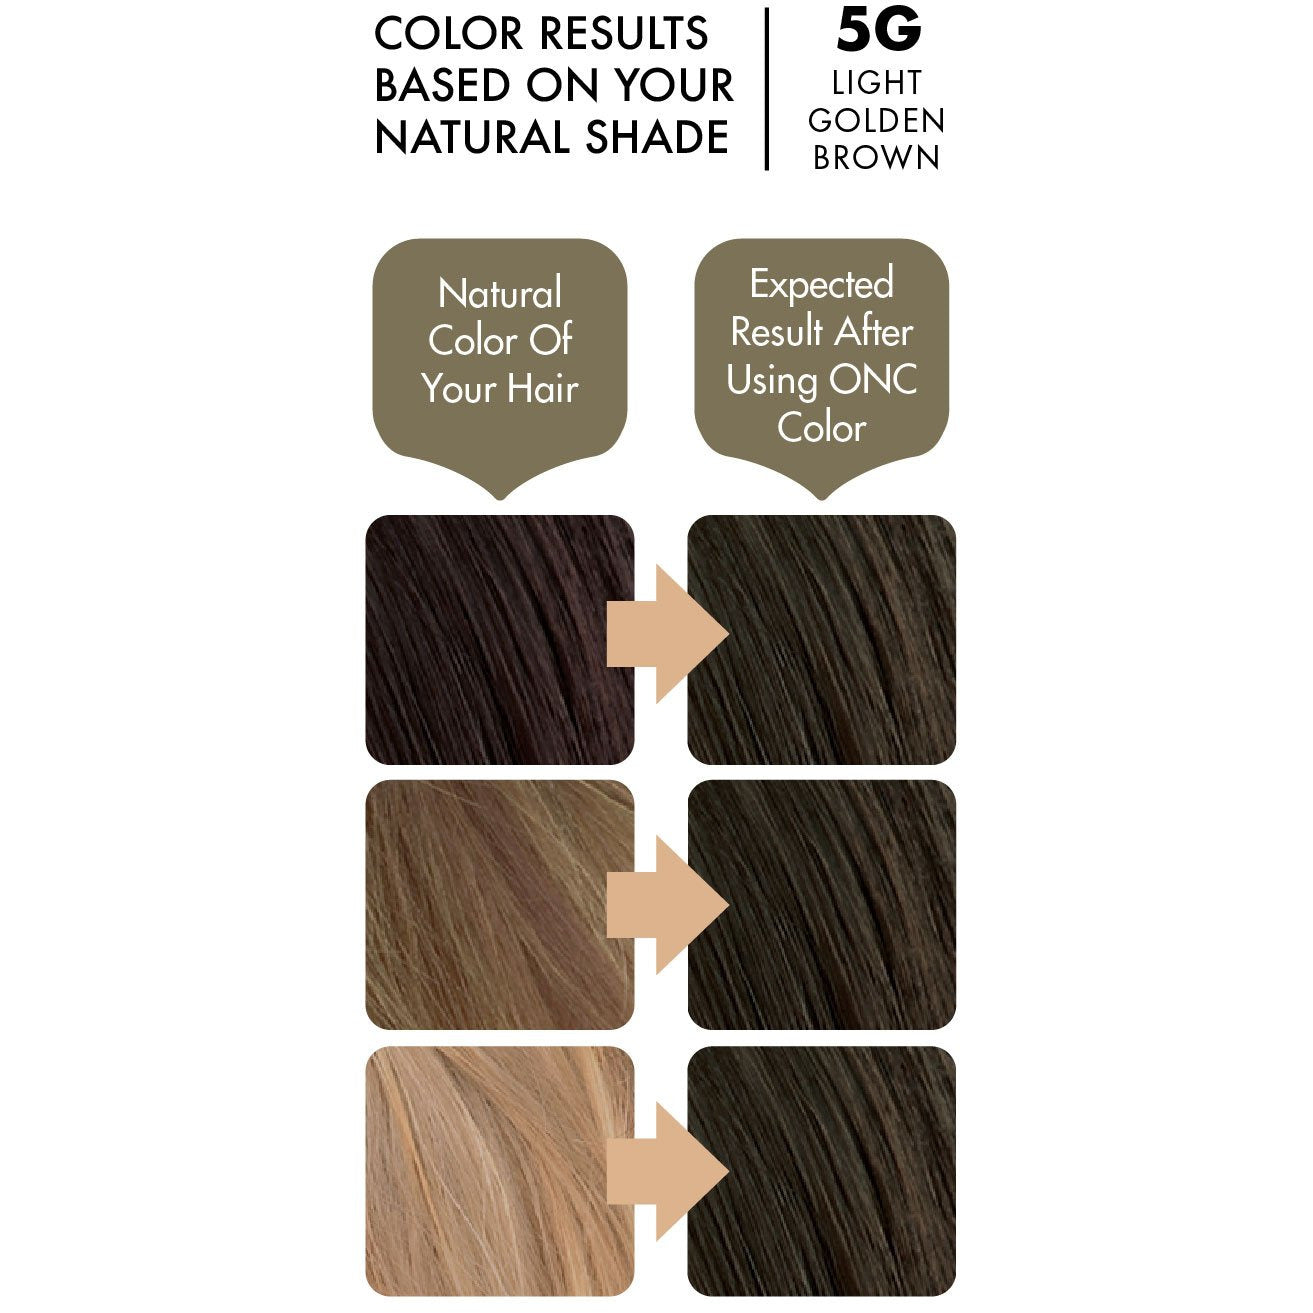 ONC 5G Light Golden Brown Hair Dye With Organic Ingredients 120 mL / 4 fl. oz. Color Results